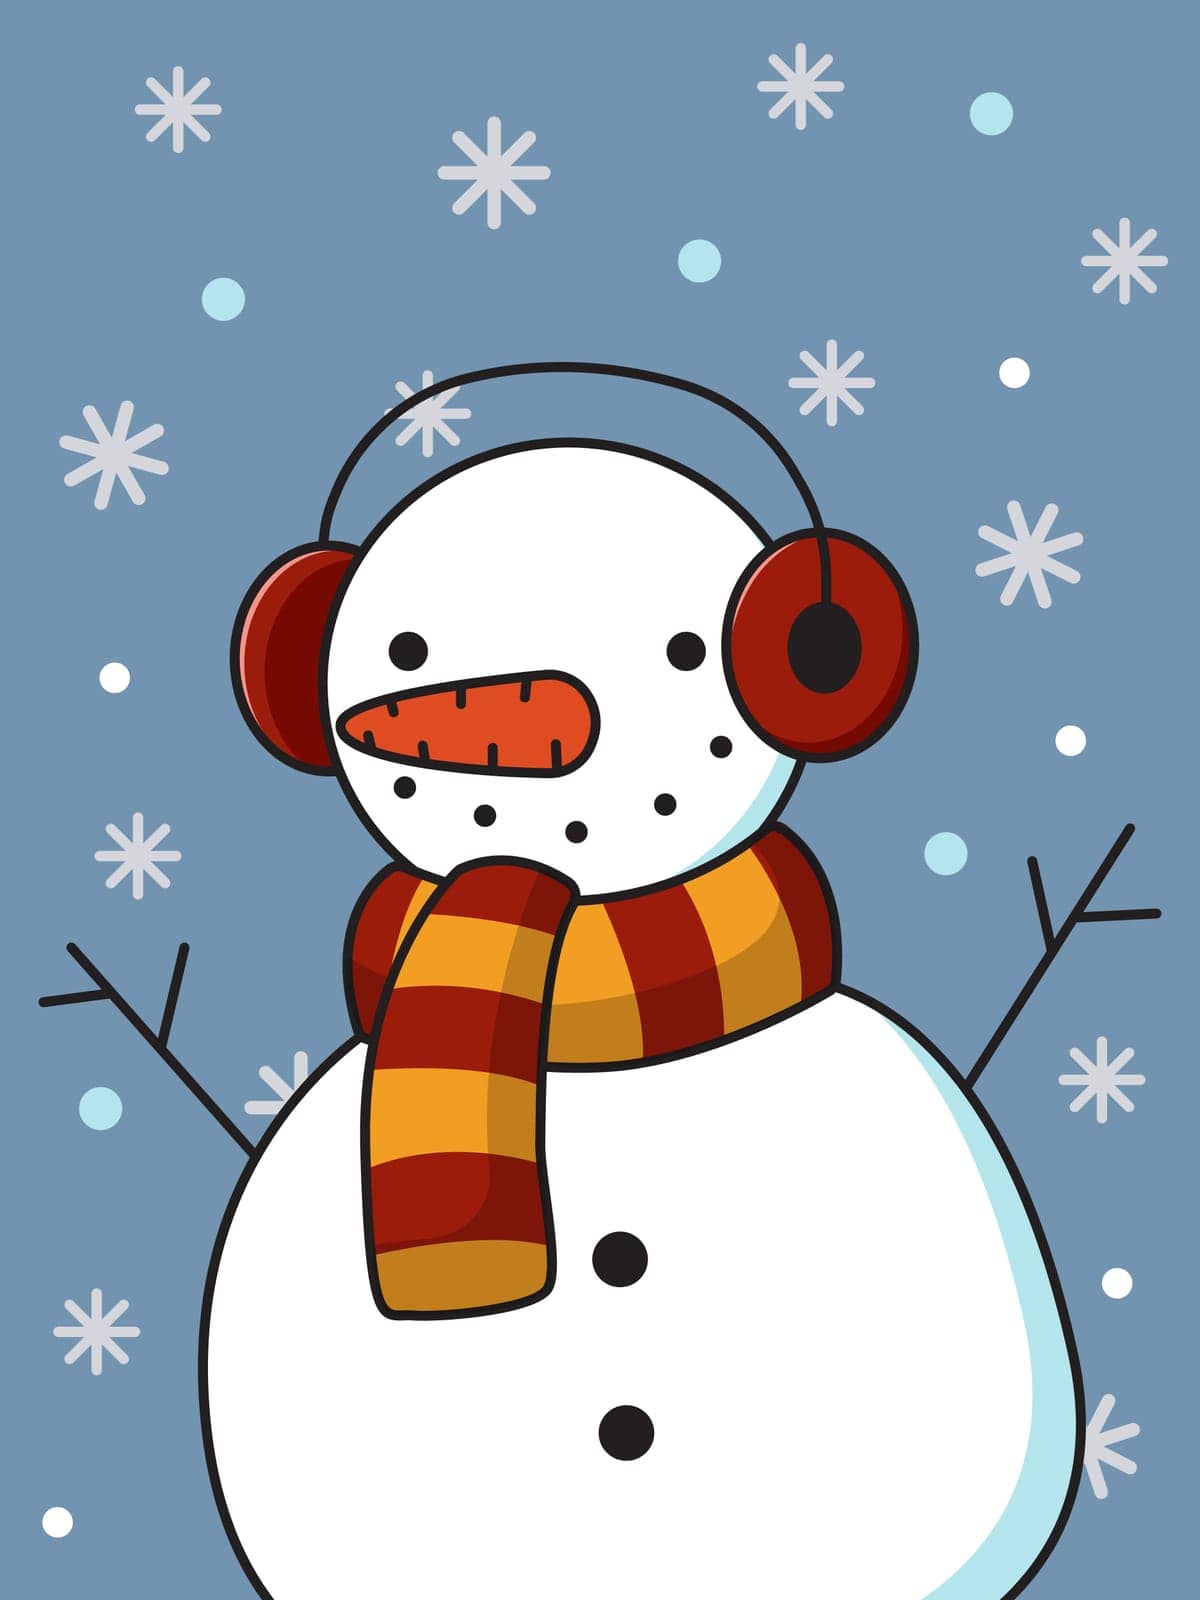 New Year card. Cute snowman on the background of snowflakes. Vector illustration.